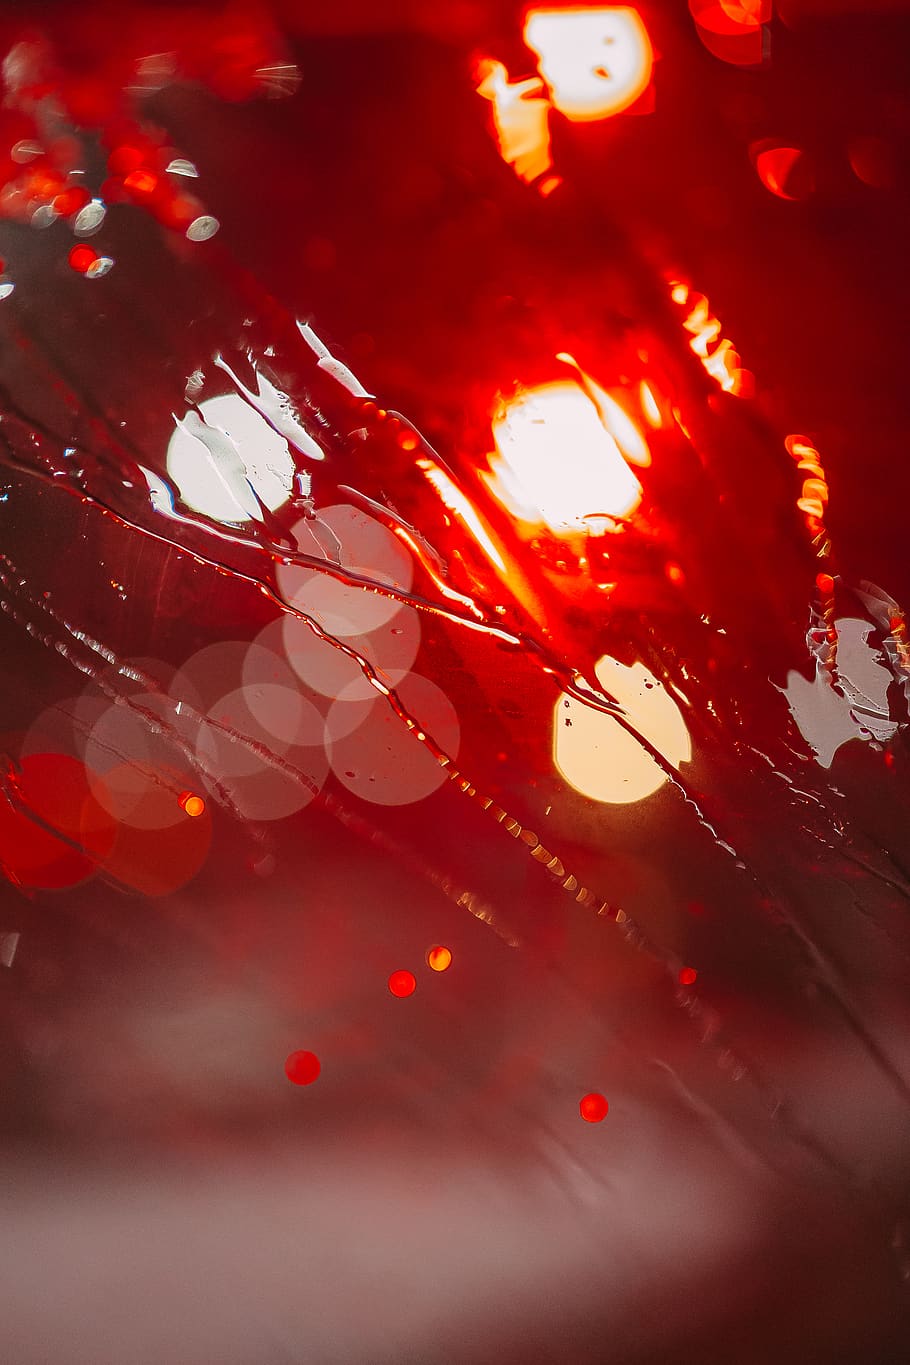 Red traffic lights seen through a rain-soaked windshield - Light red